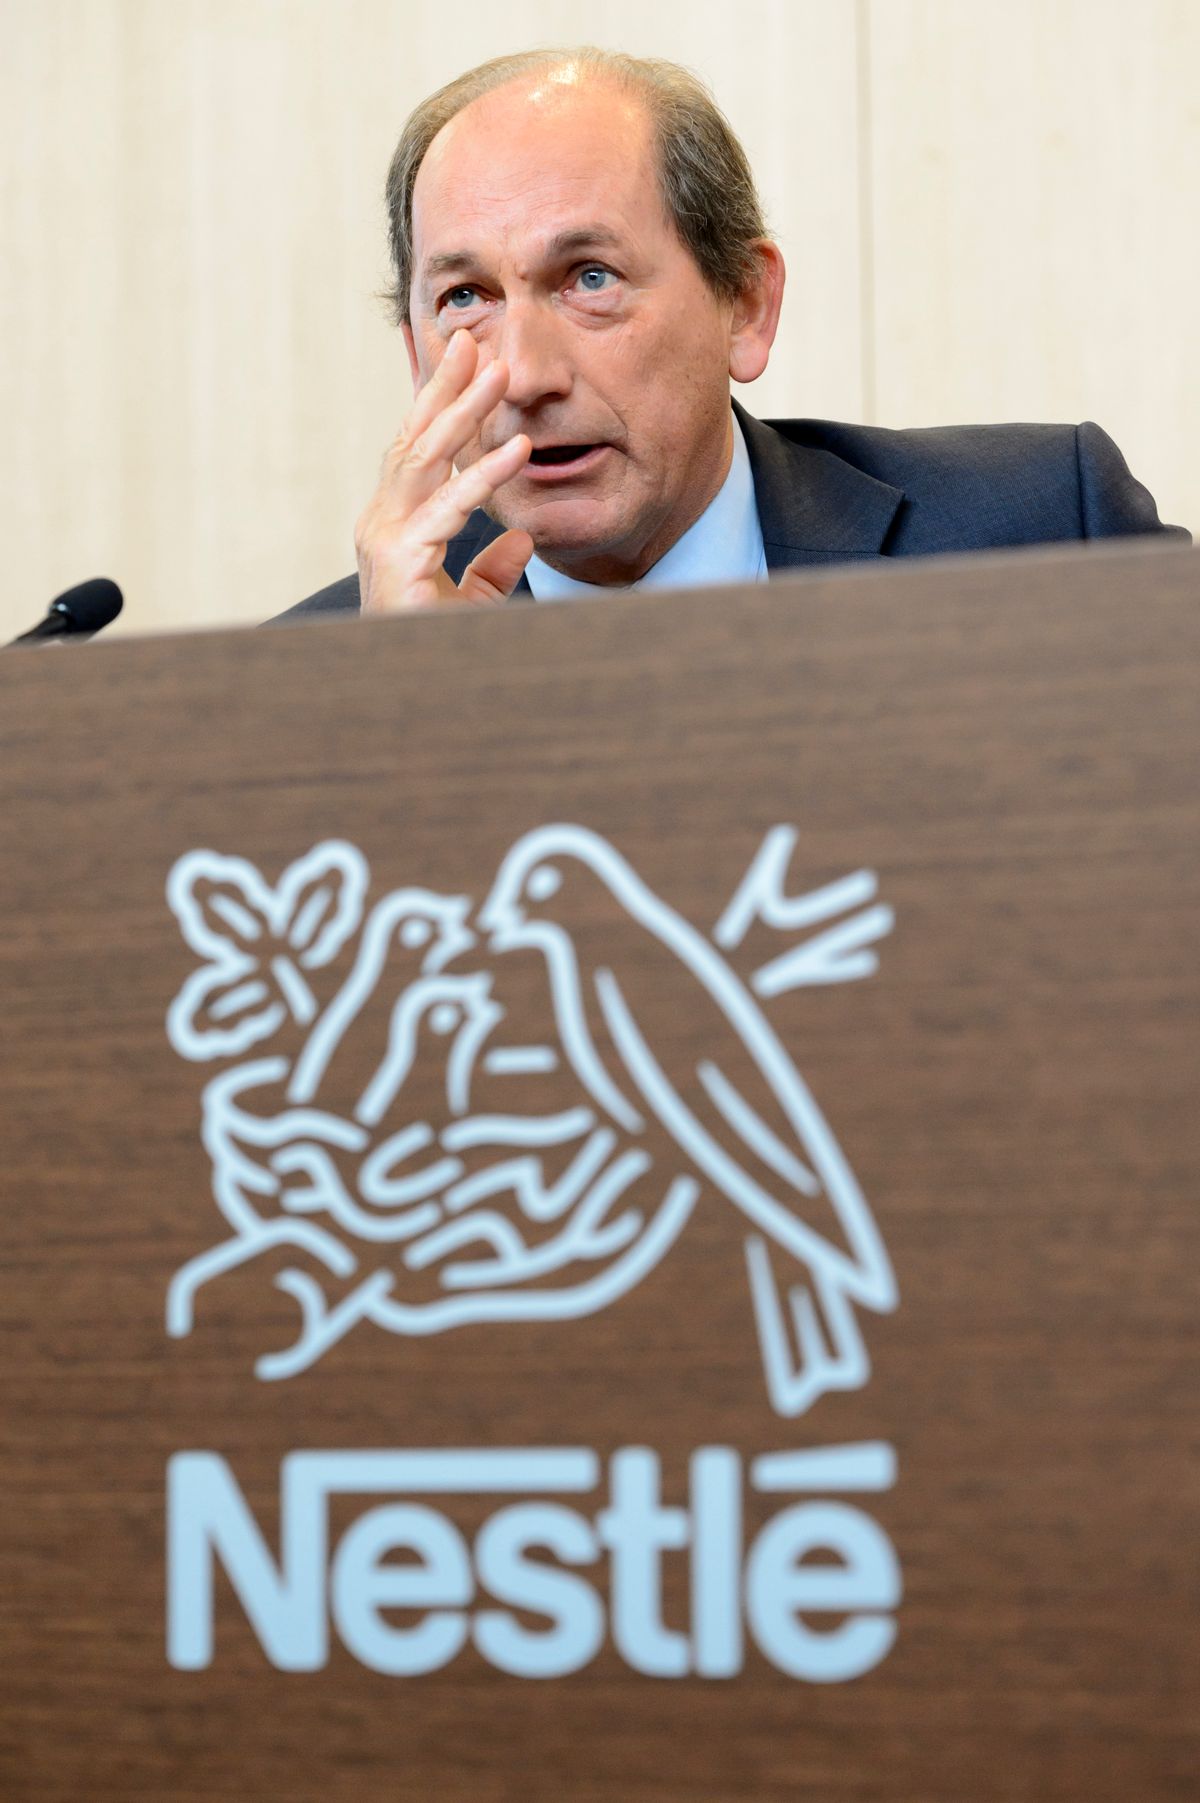 Nestle CEO Paul Bulcke speaks during the 2015 full-year results press conference of Nestle in Vevey, Switzerland, Thursday, Feb. 18, 2016. Nestle reported net income fell to 9.07 billion Swiss francs (US dollar 9.15 billion), from 14.46 billion Swiss francs a year earlier, citing the re-evaluation at the Galderma dermatological pharmaceutical business and the 2014 sale of a stake in the French cosmetics company. (Laurent Gillieron/Keystone via AP) (AP)